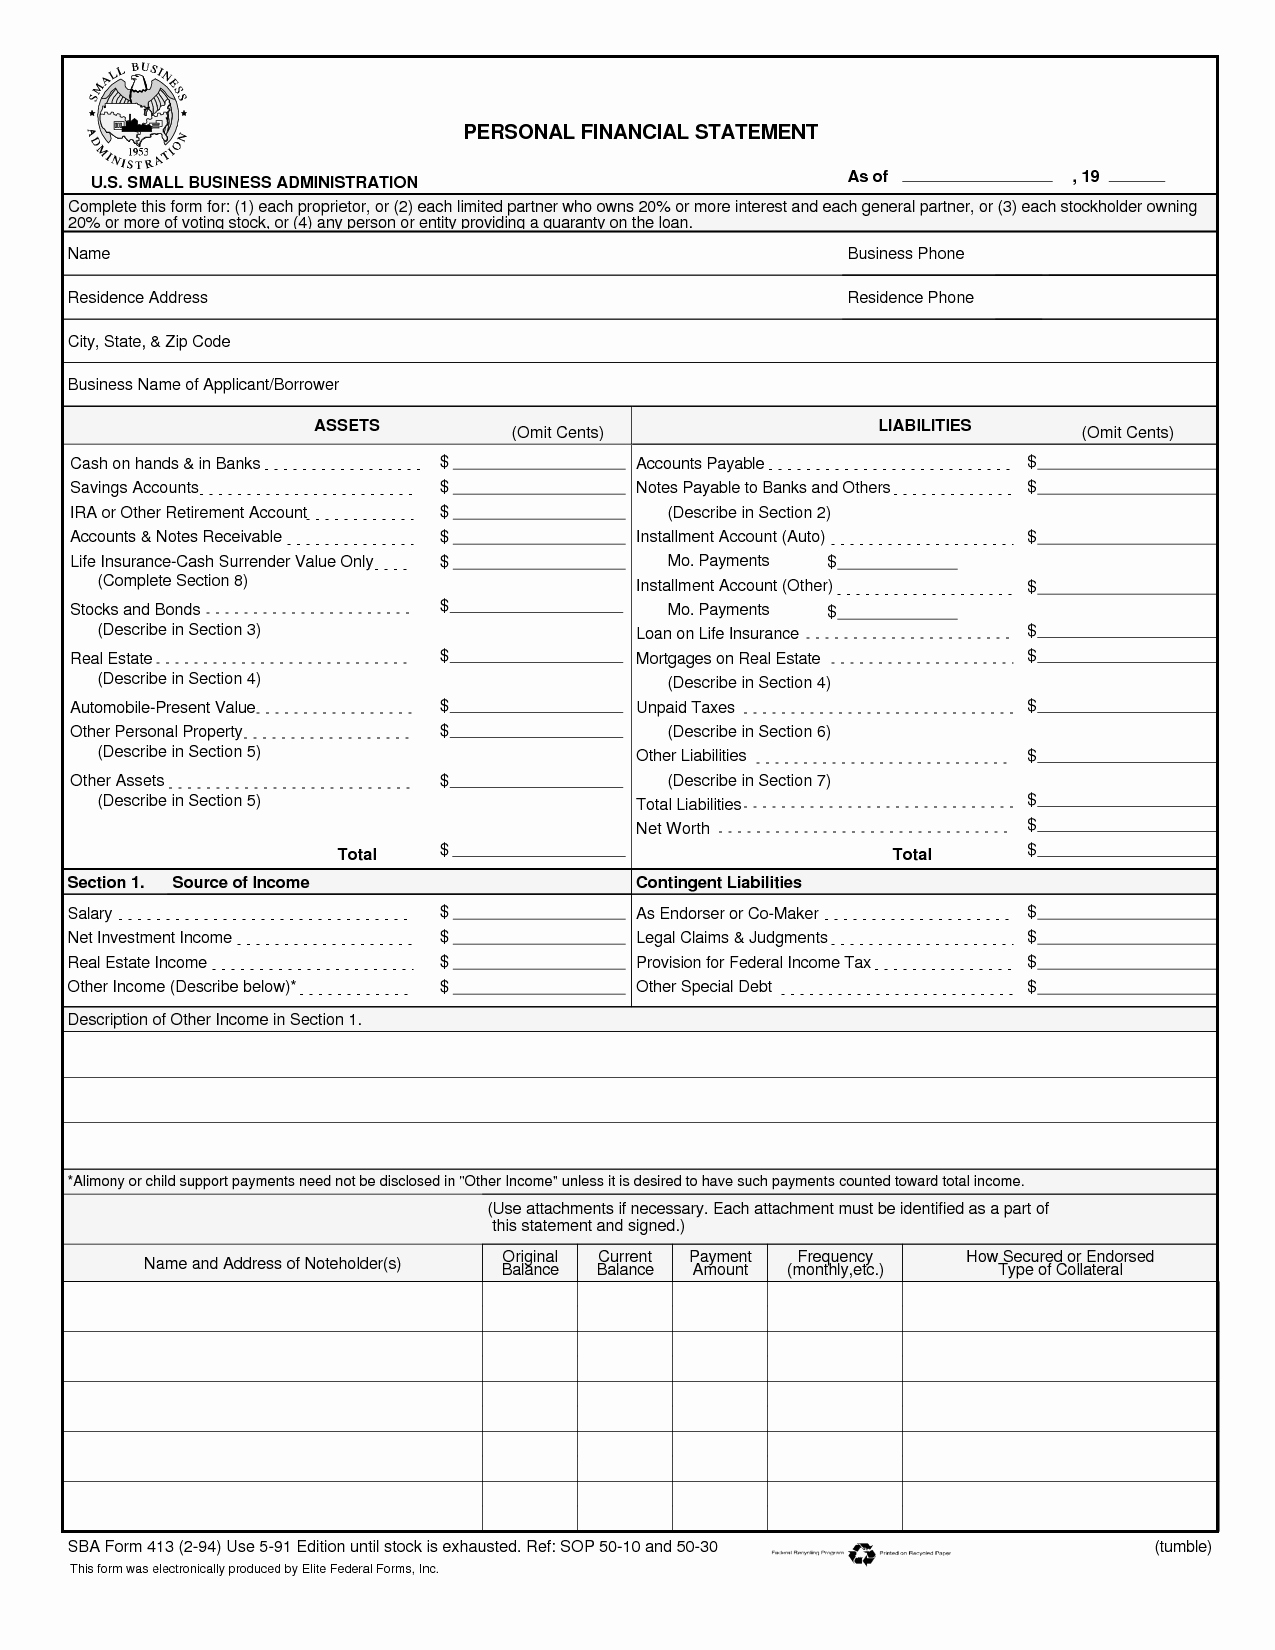 Small Business Financial Statement Template Elegant Sample In E Statement for Small Business Business